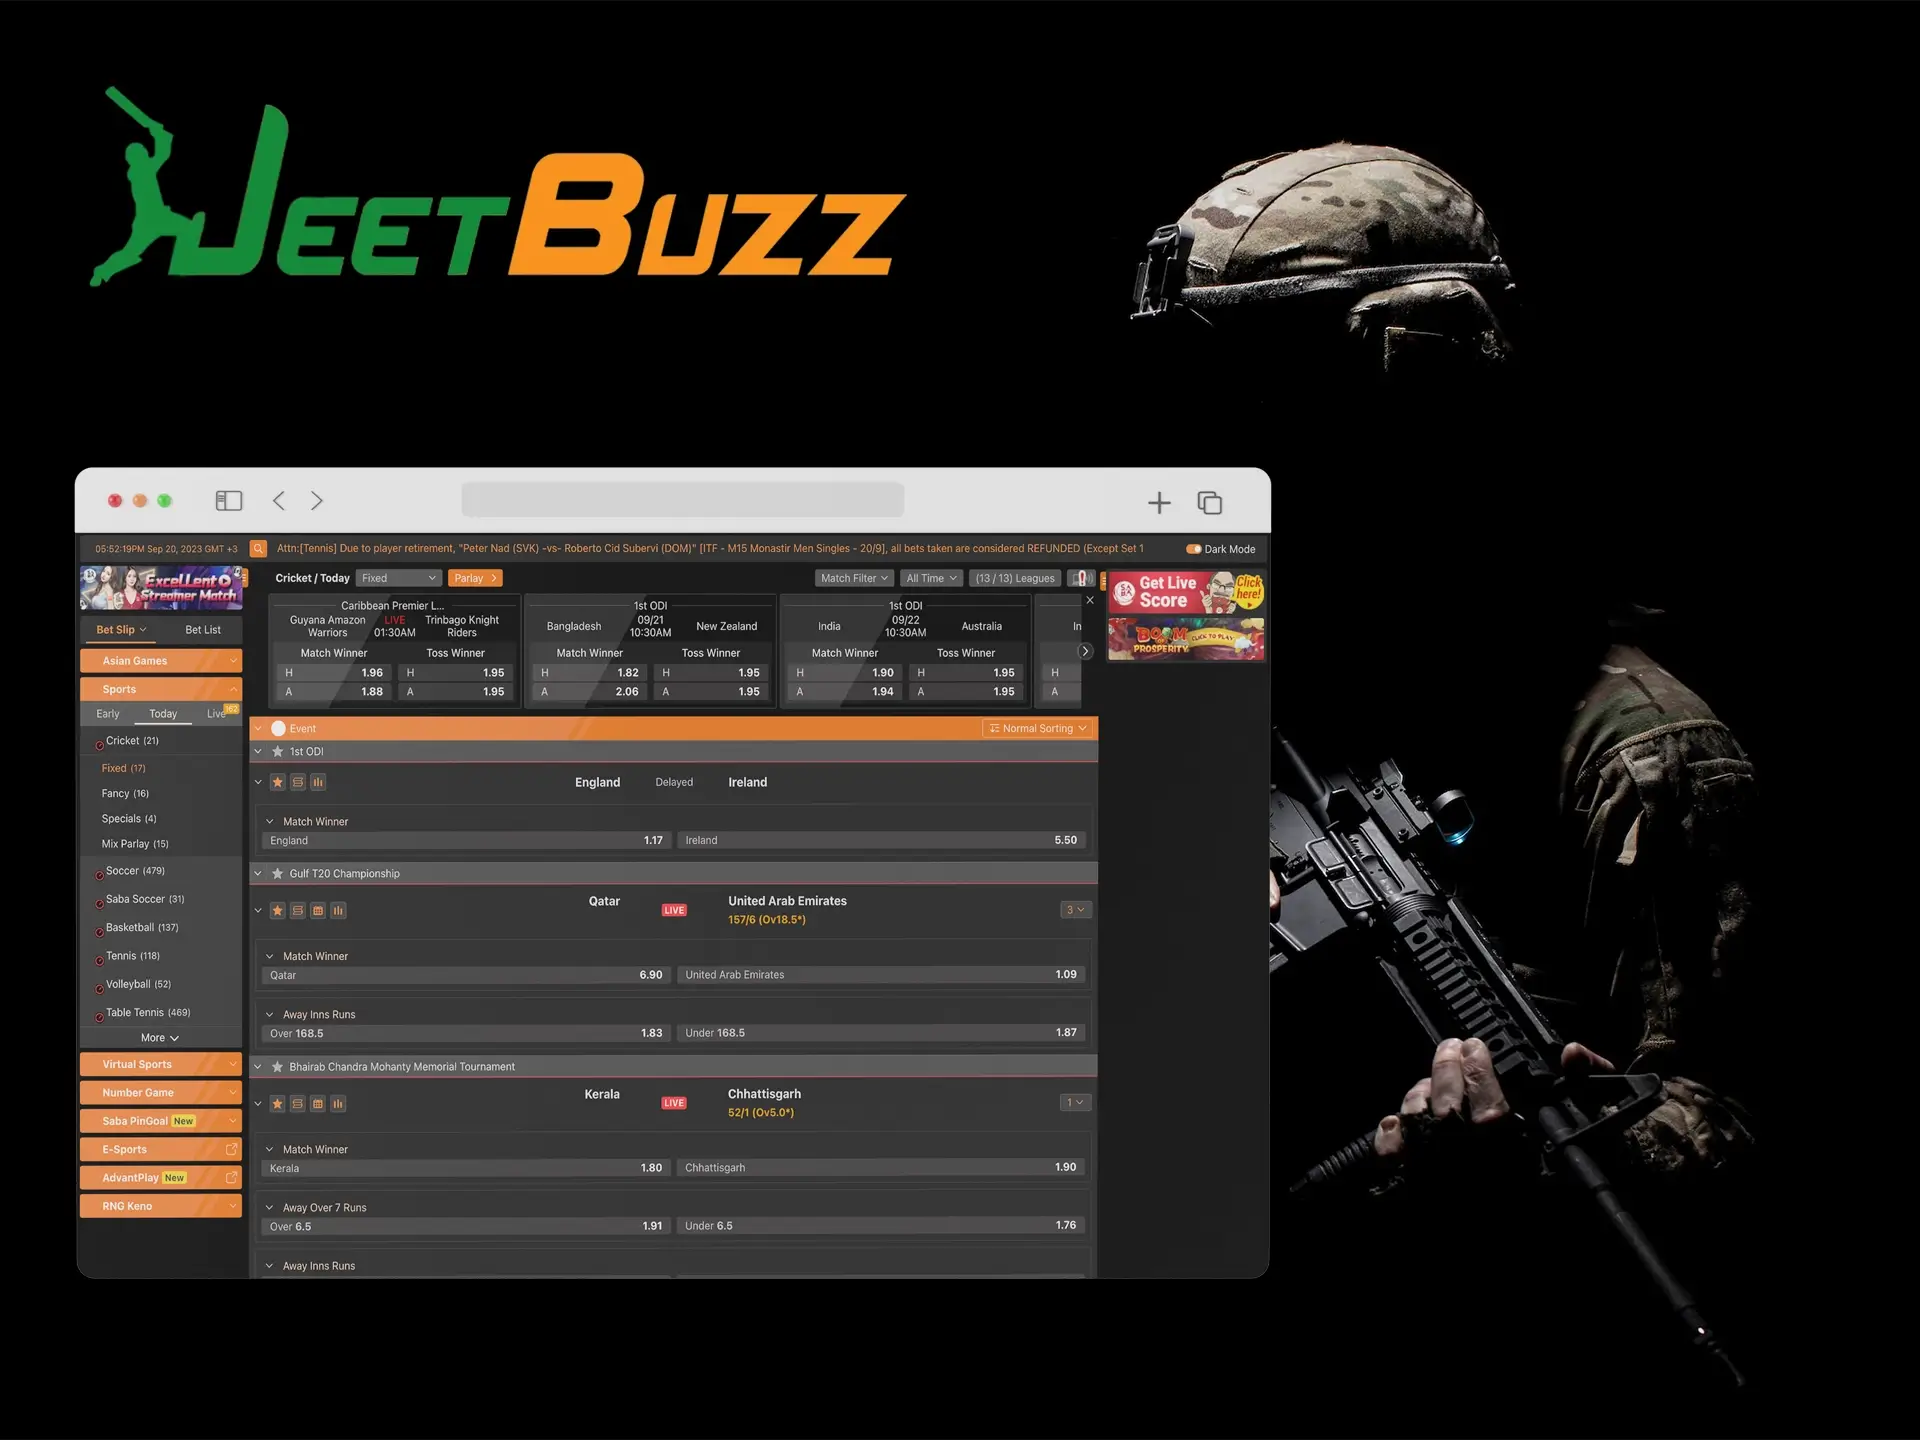 Cybersports is easy, along with Jeetbuzz.